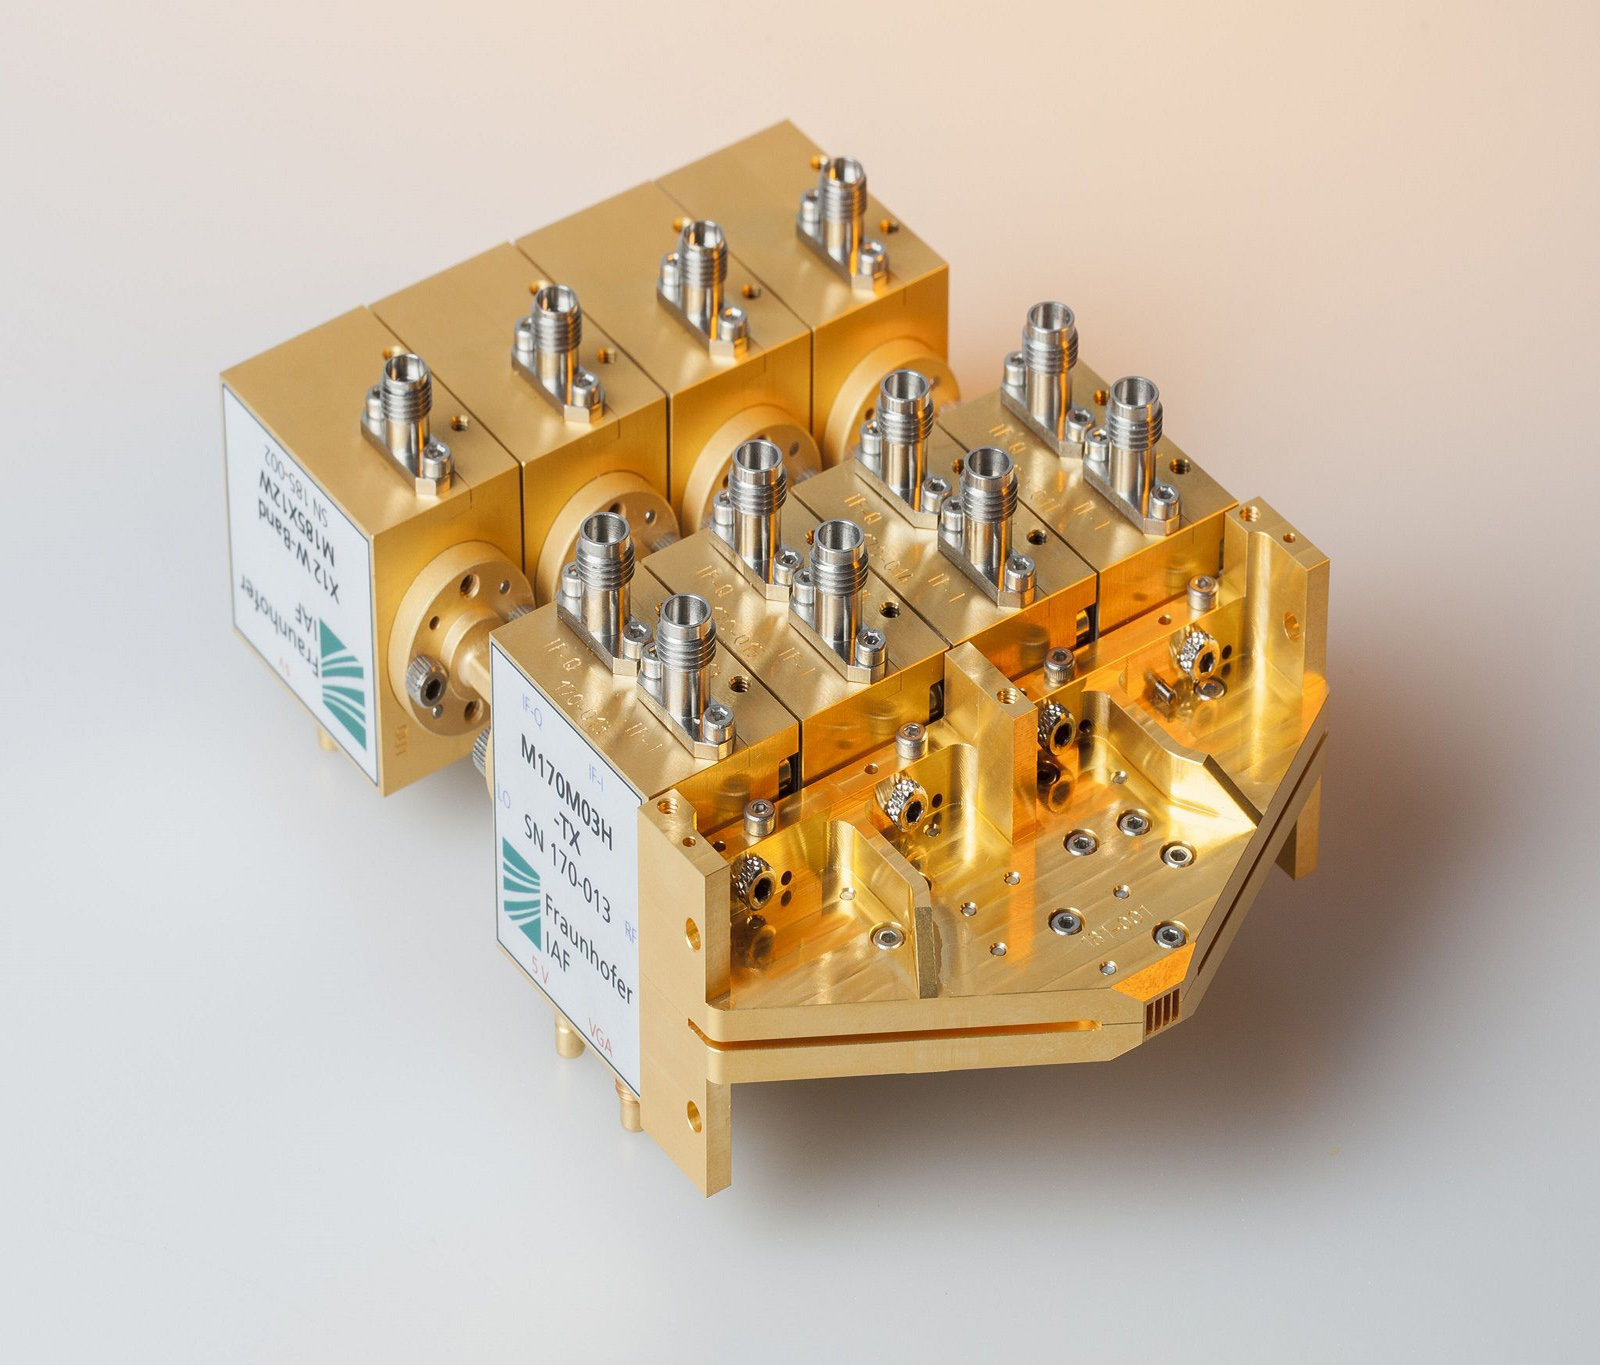 In the TERRANOVA project, Fraunhofer IAF is focusing on the integration of wireless modules at the chip level. The image shows a functional prototype of a 300 GHz multichannel wireless system for further integration as a system-on-chip. 